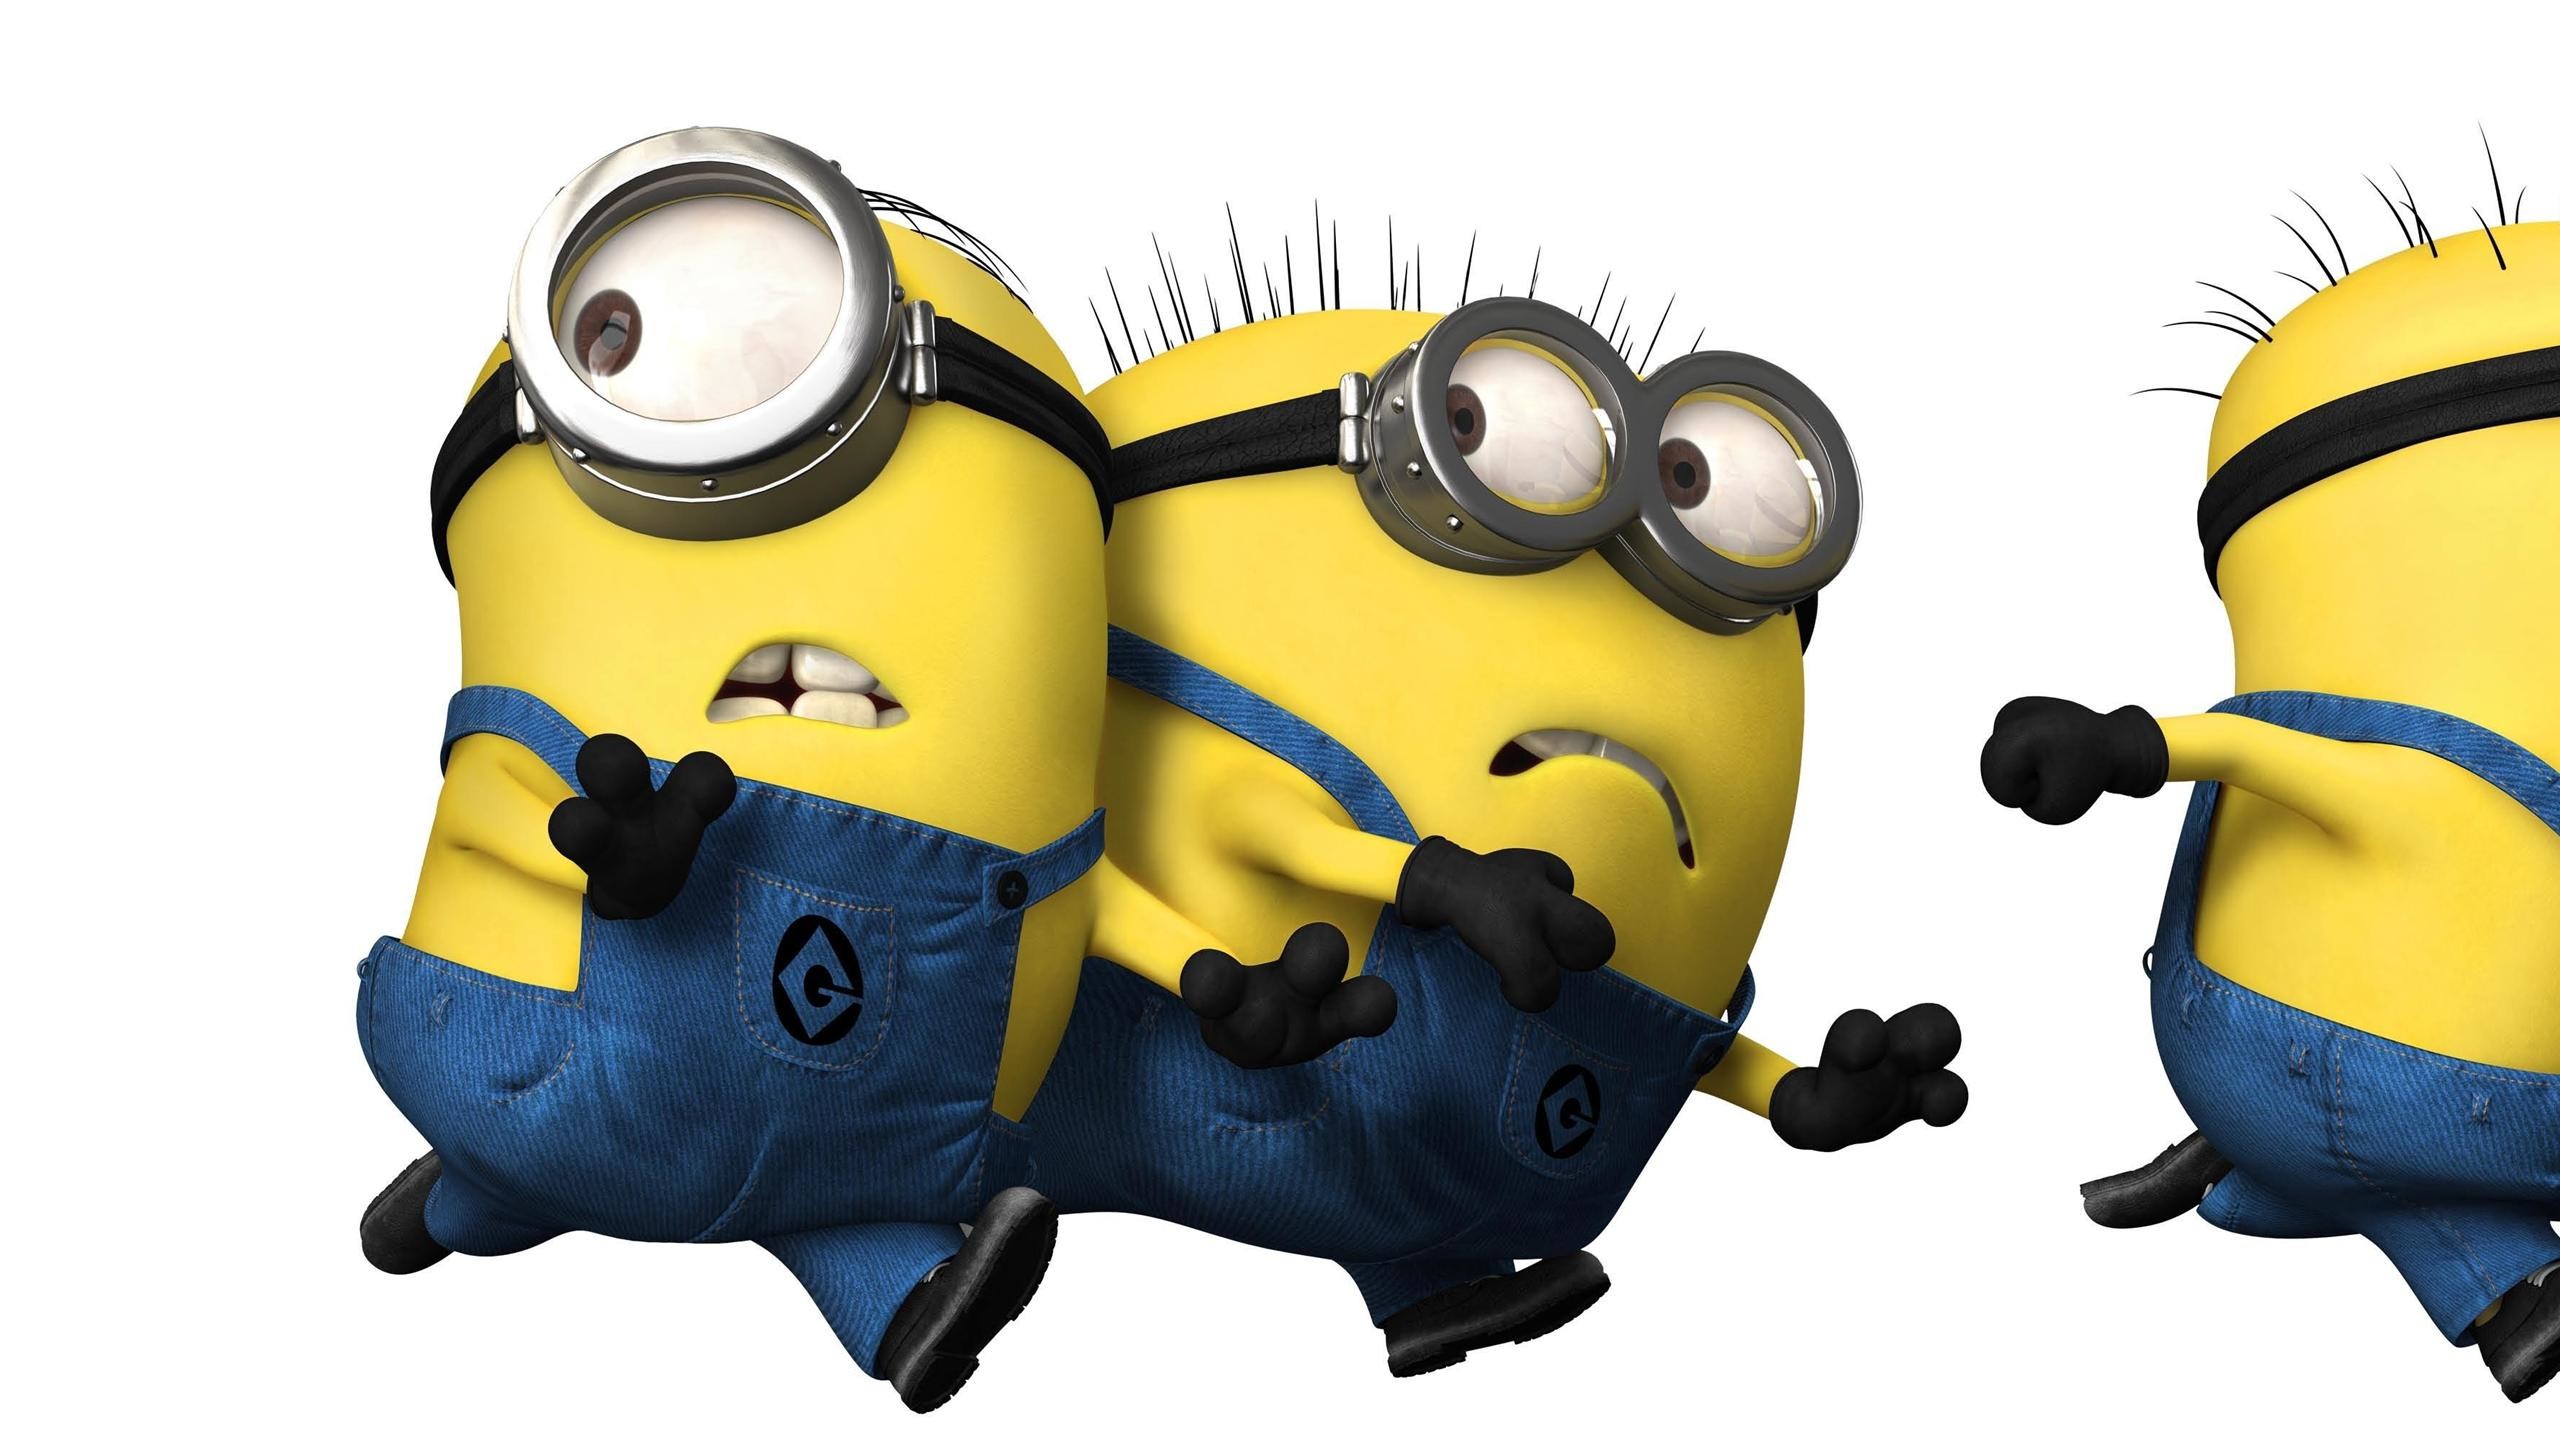 2560x1440 Cartoons Despicable Me Funny Wallpapers Images Photos 2560Ã1440 Minion  Despicable Me Wallpapers (38